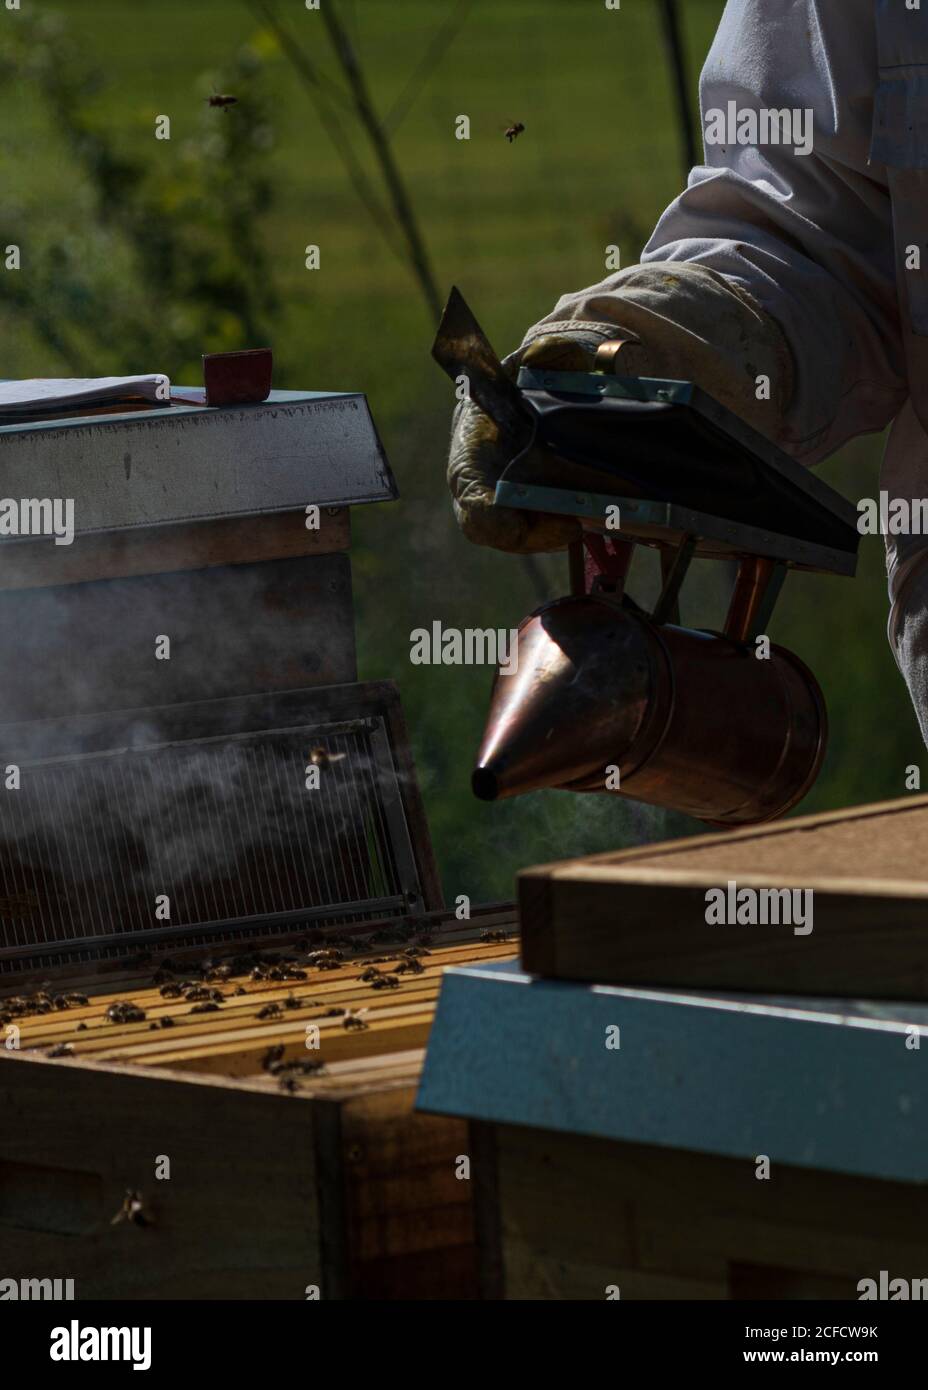 A beekeeping on the edge of the forest: everyday life of a beekeeper. The smoker is used to generate smoke in the apiary. The smoke calms the bees Stock Photo